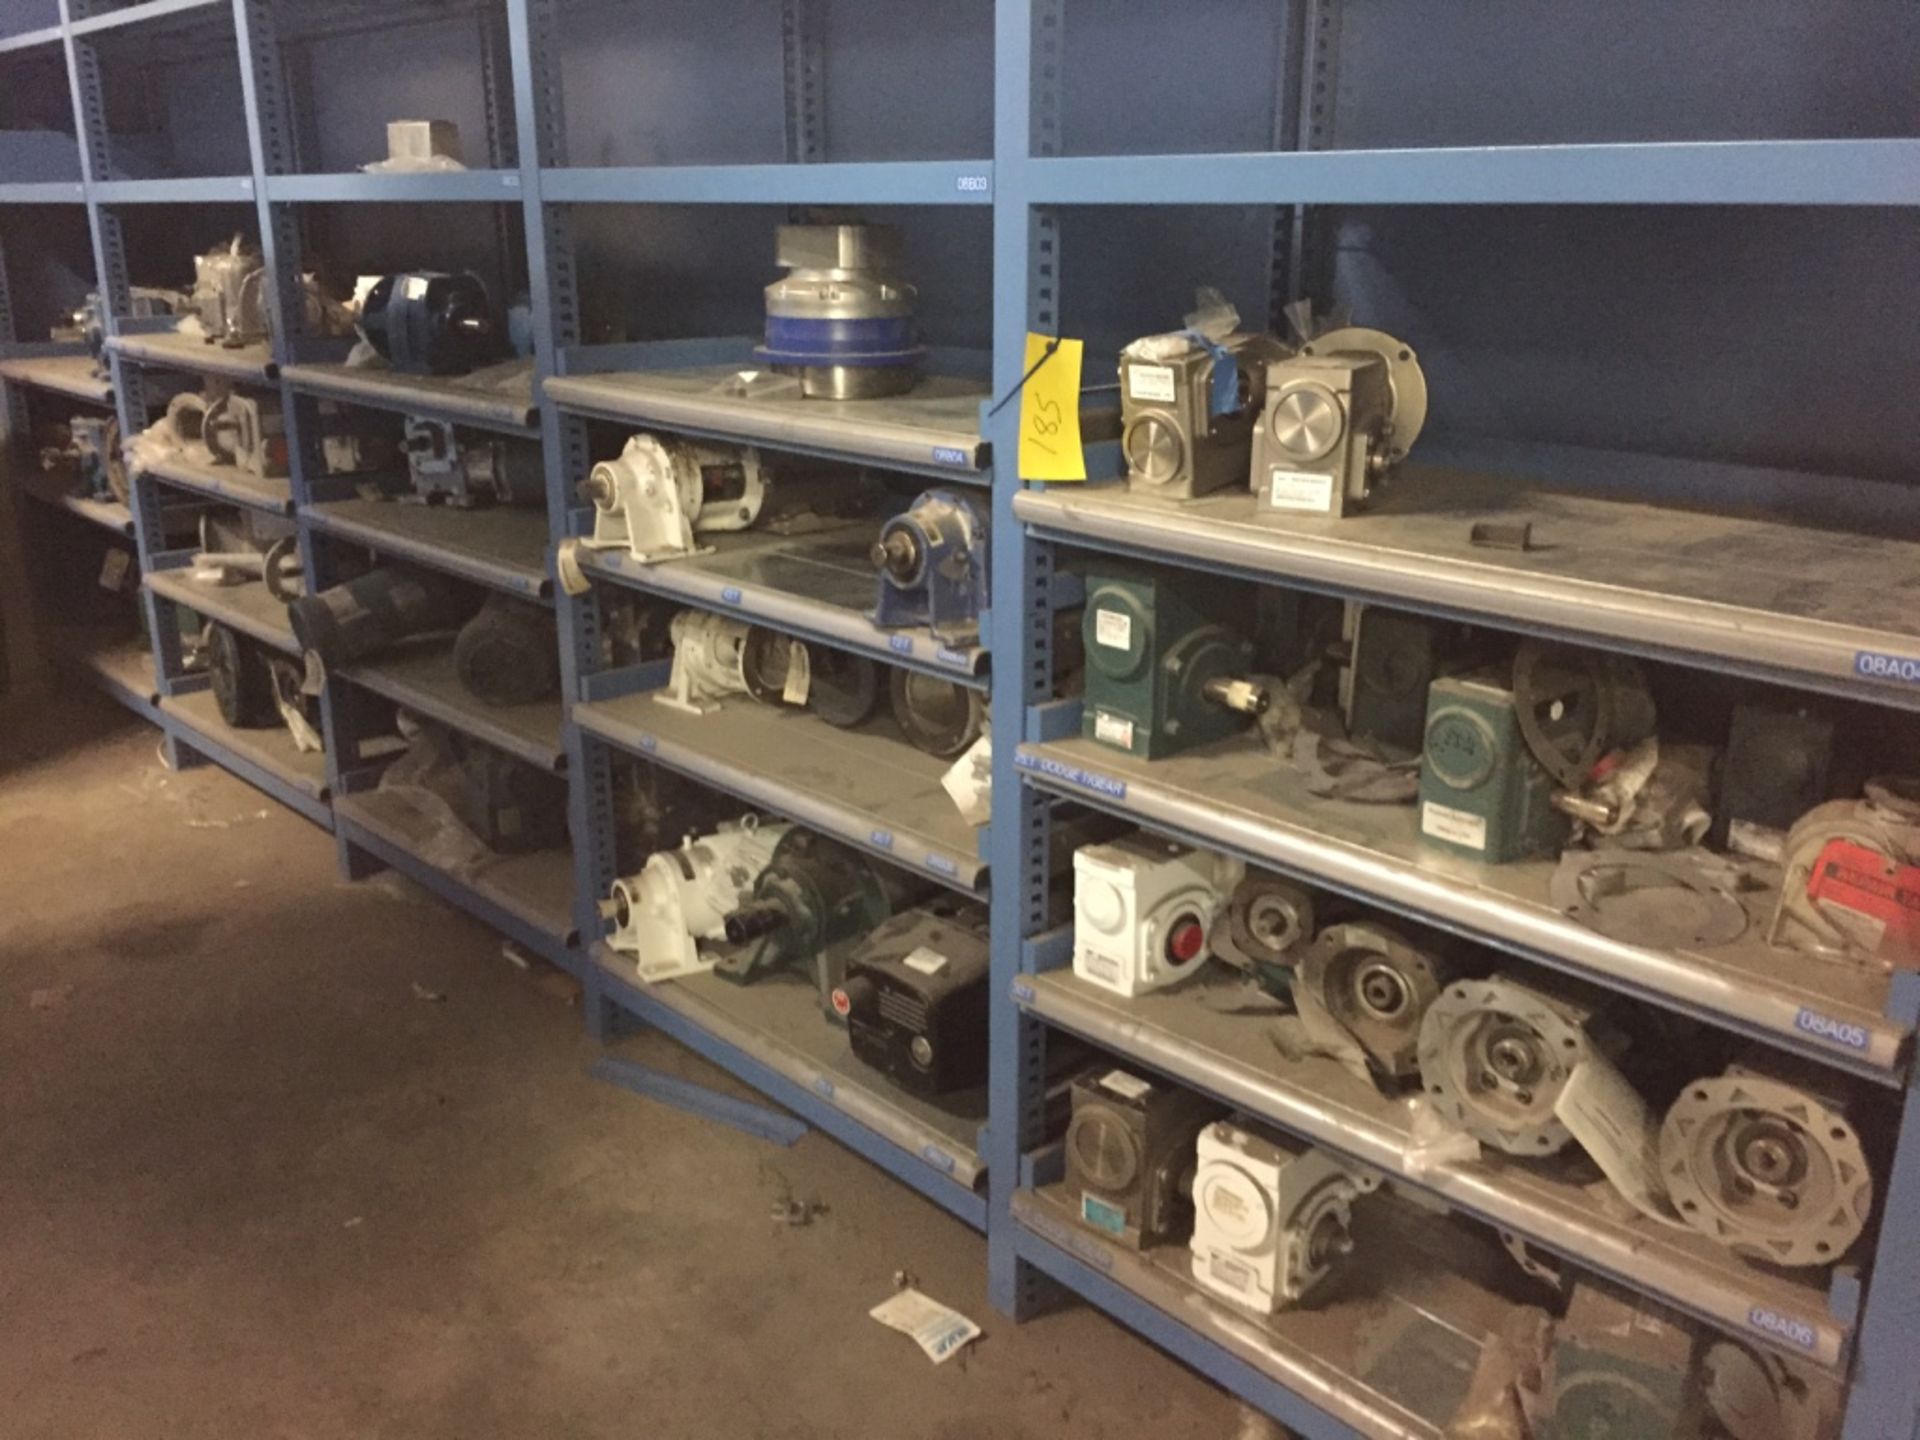 Lot of replacement Gearboxes and Motors Shelf not included - Rigging Fee $100, If Crating or Lumbe